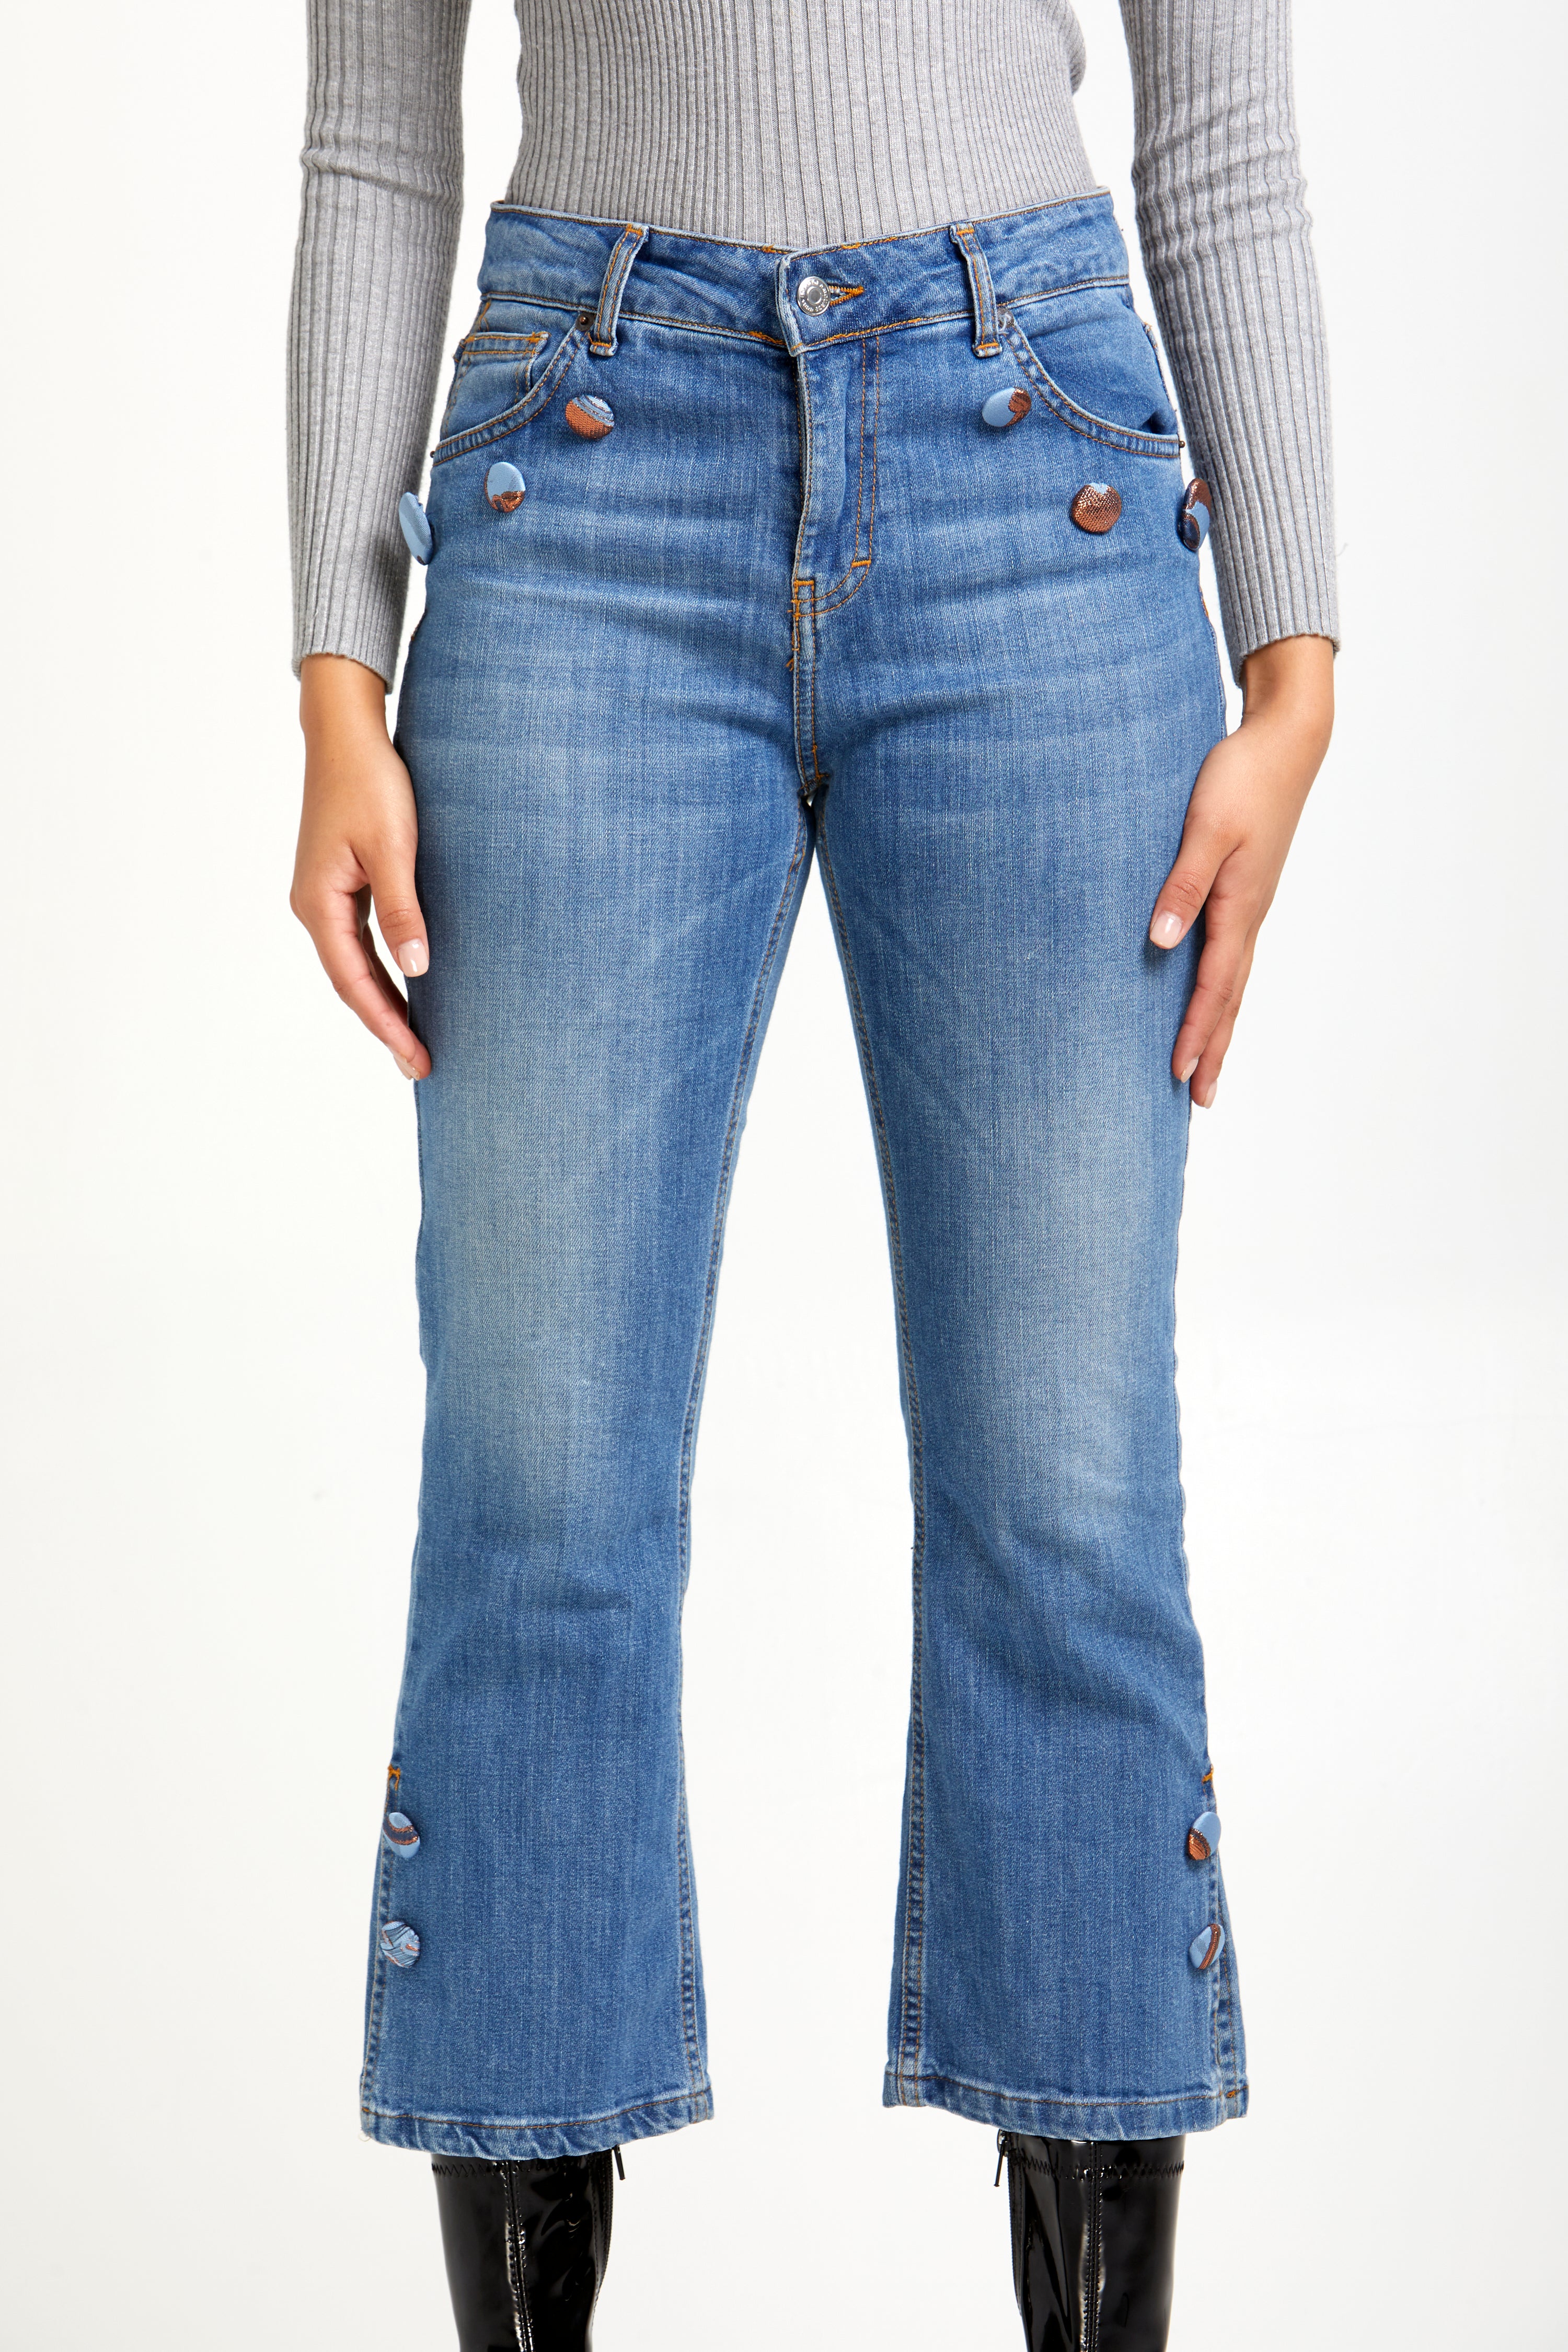 AnnaCristy Milano High Rise Cropped Cotton Jeans Front Closeup- Made in Italy